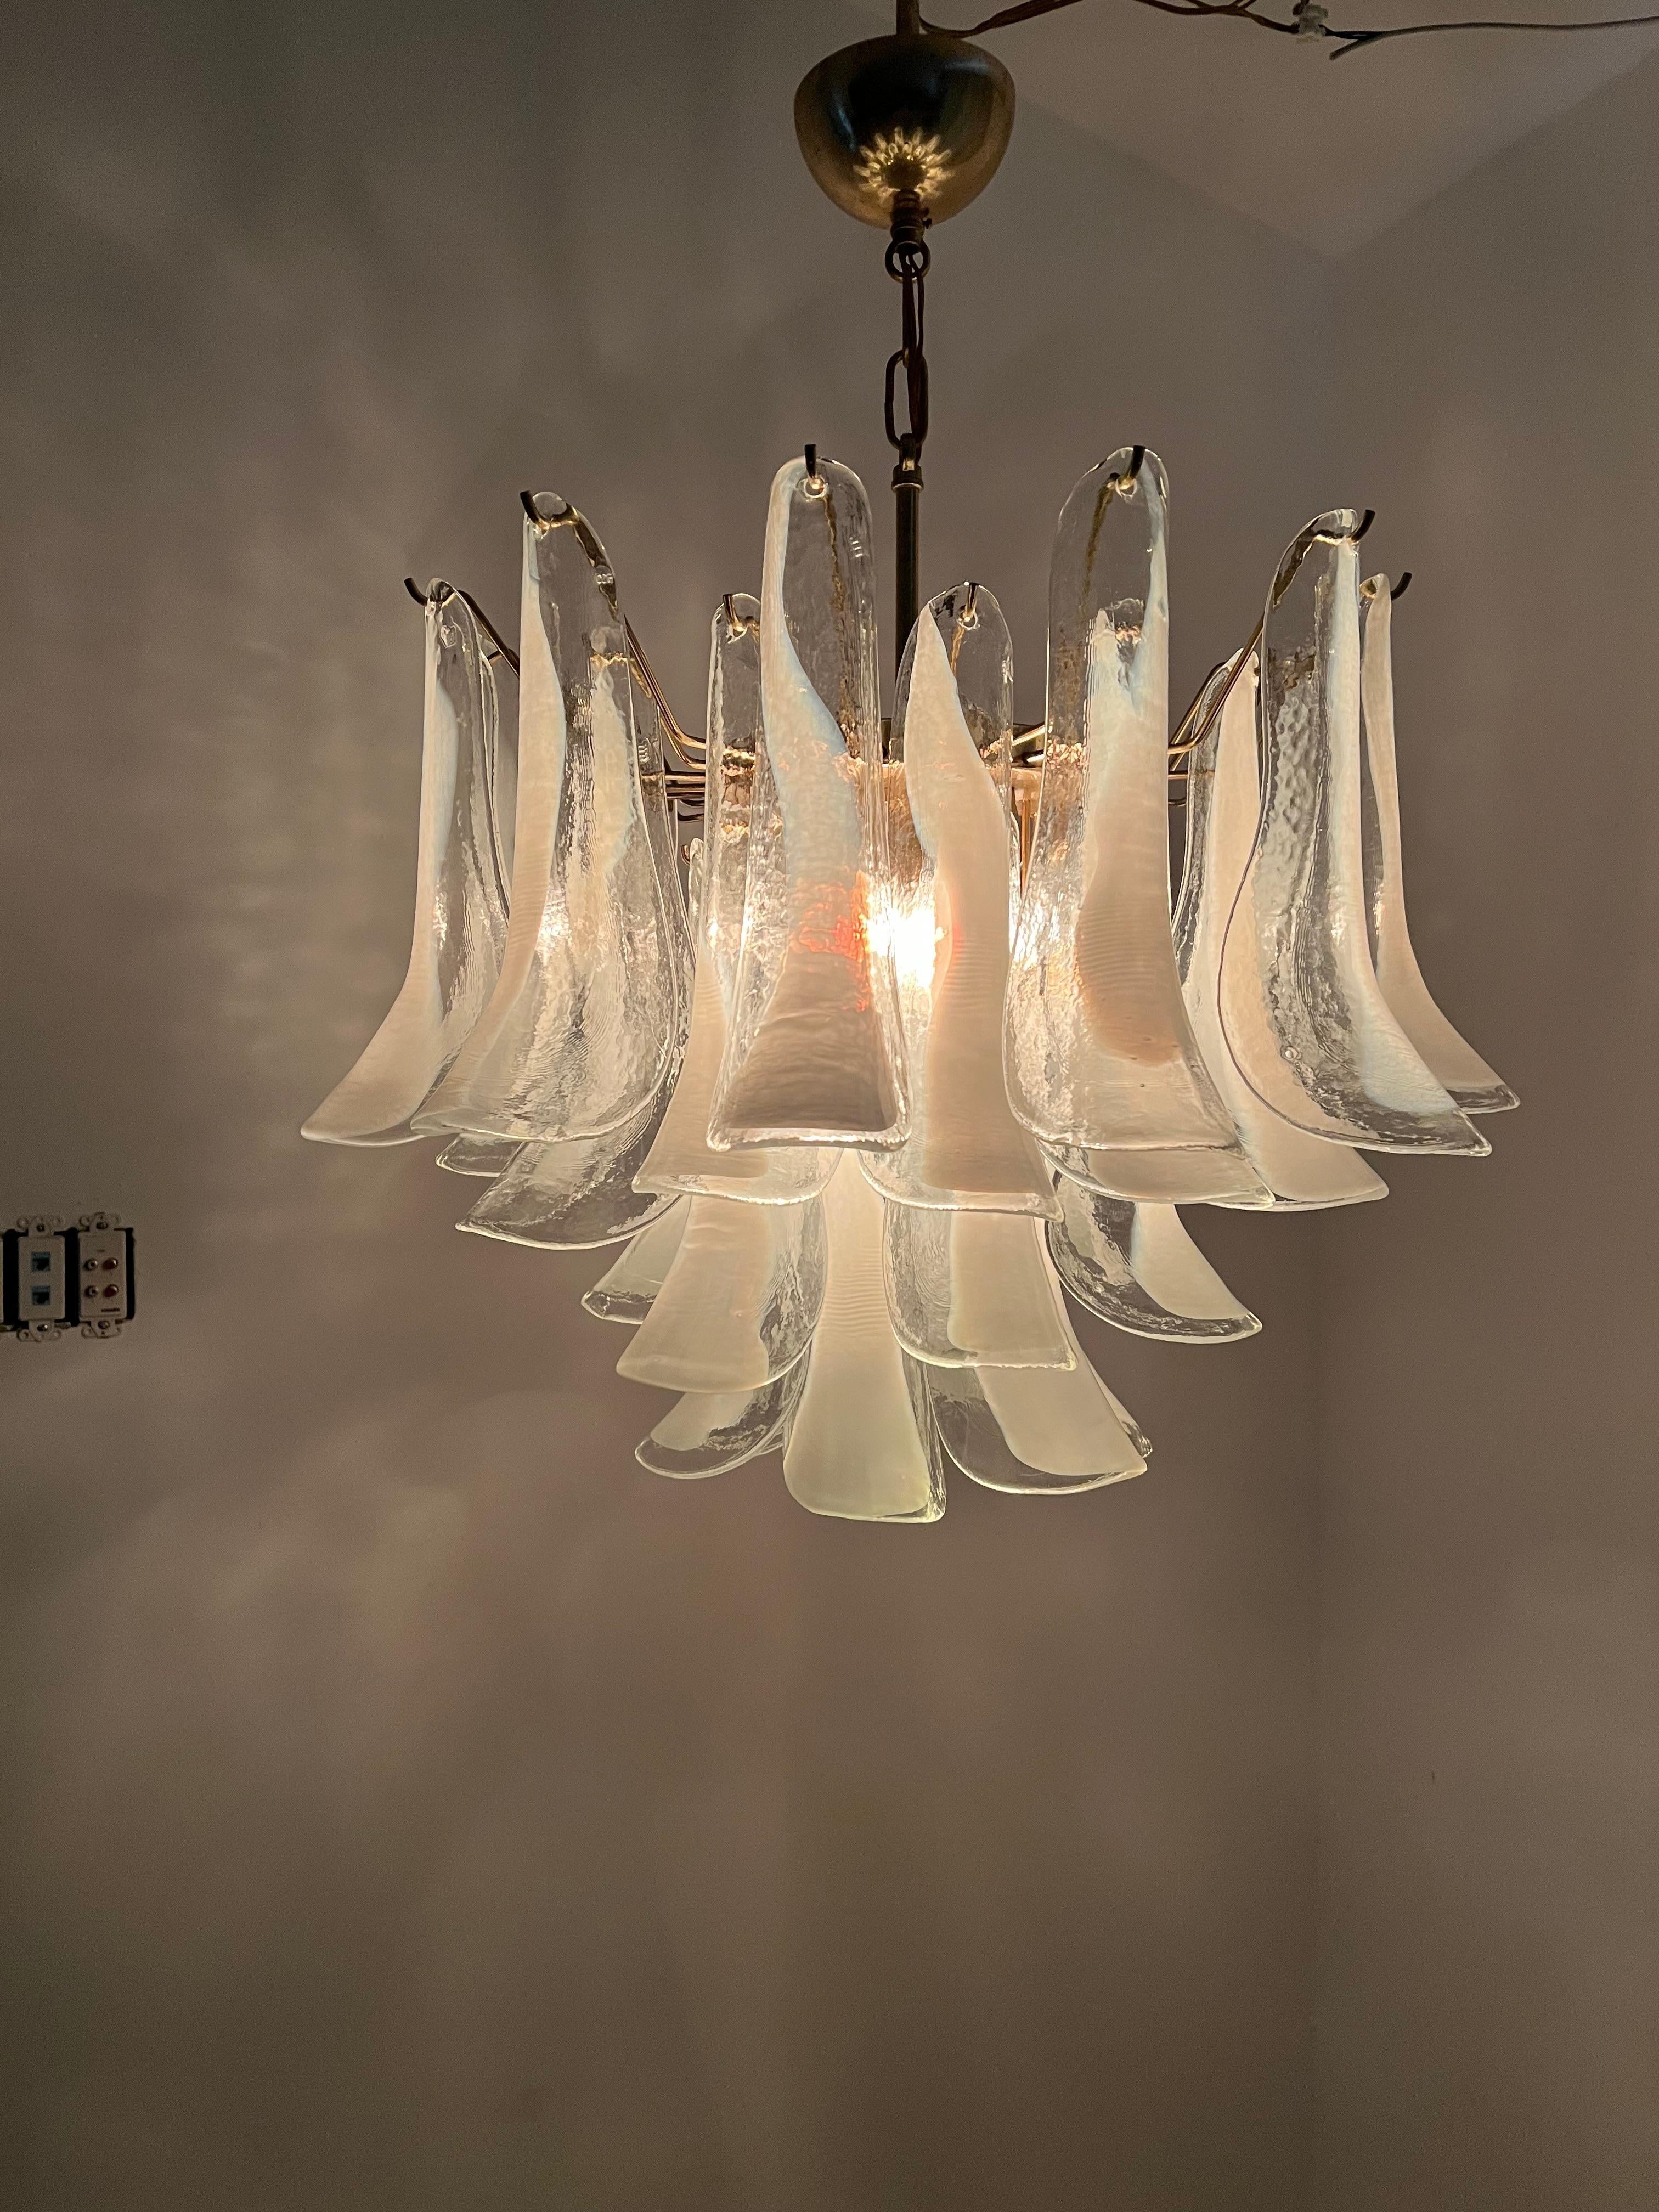 Two Identical Signed Mid-Century Modern Chandeliers, La Murrina in Murano Glass For Sale 3